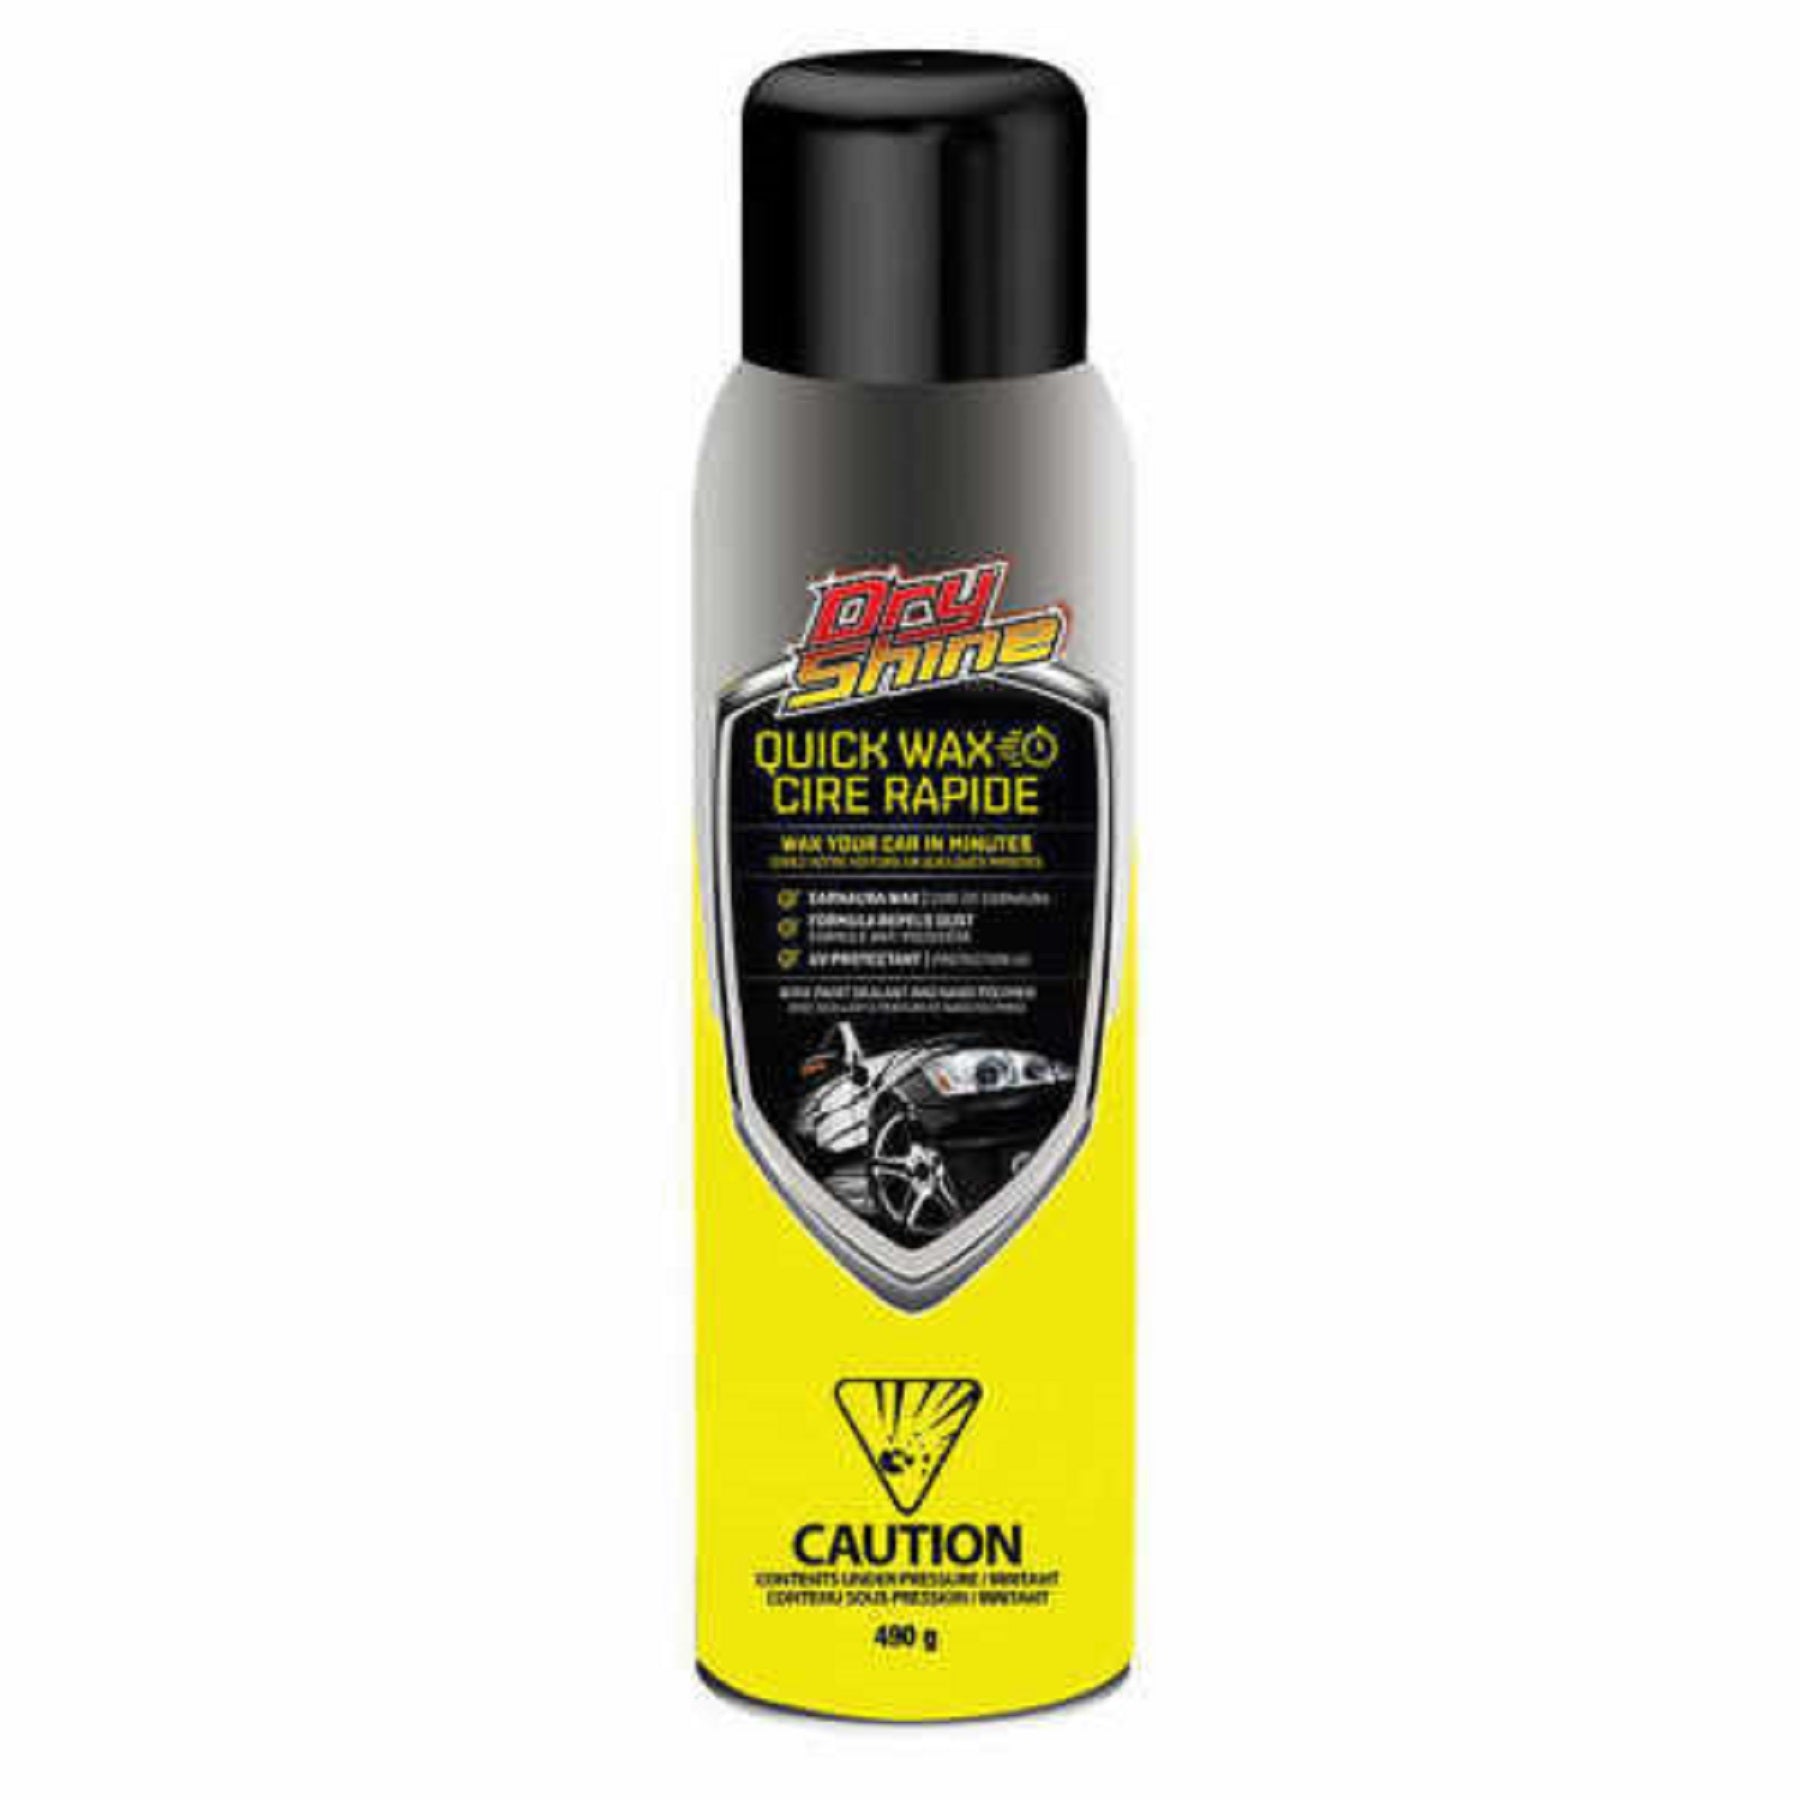 Active Wax Spray Wax: Protect & shine your car even when your on